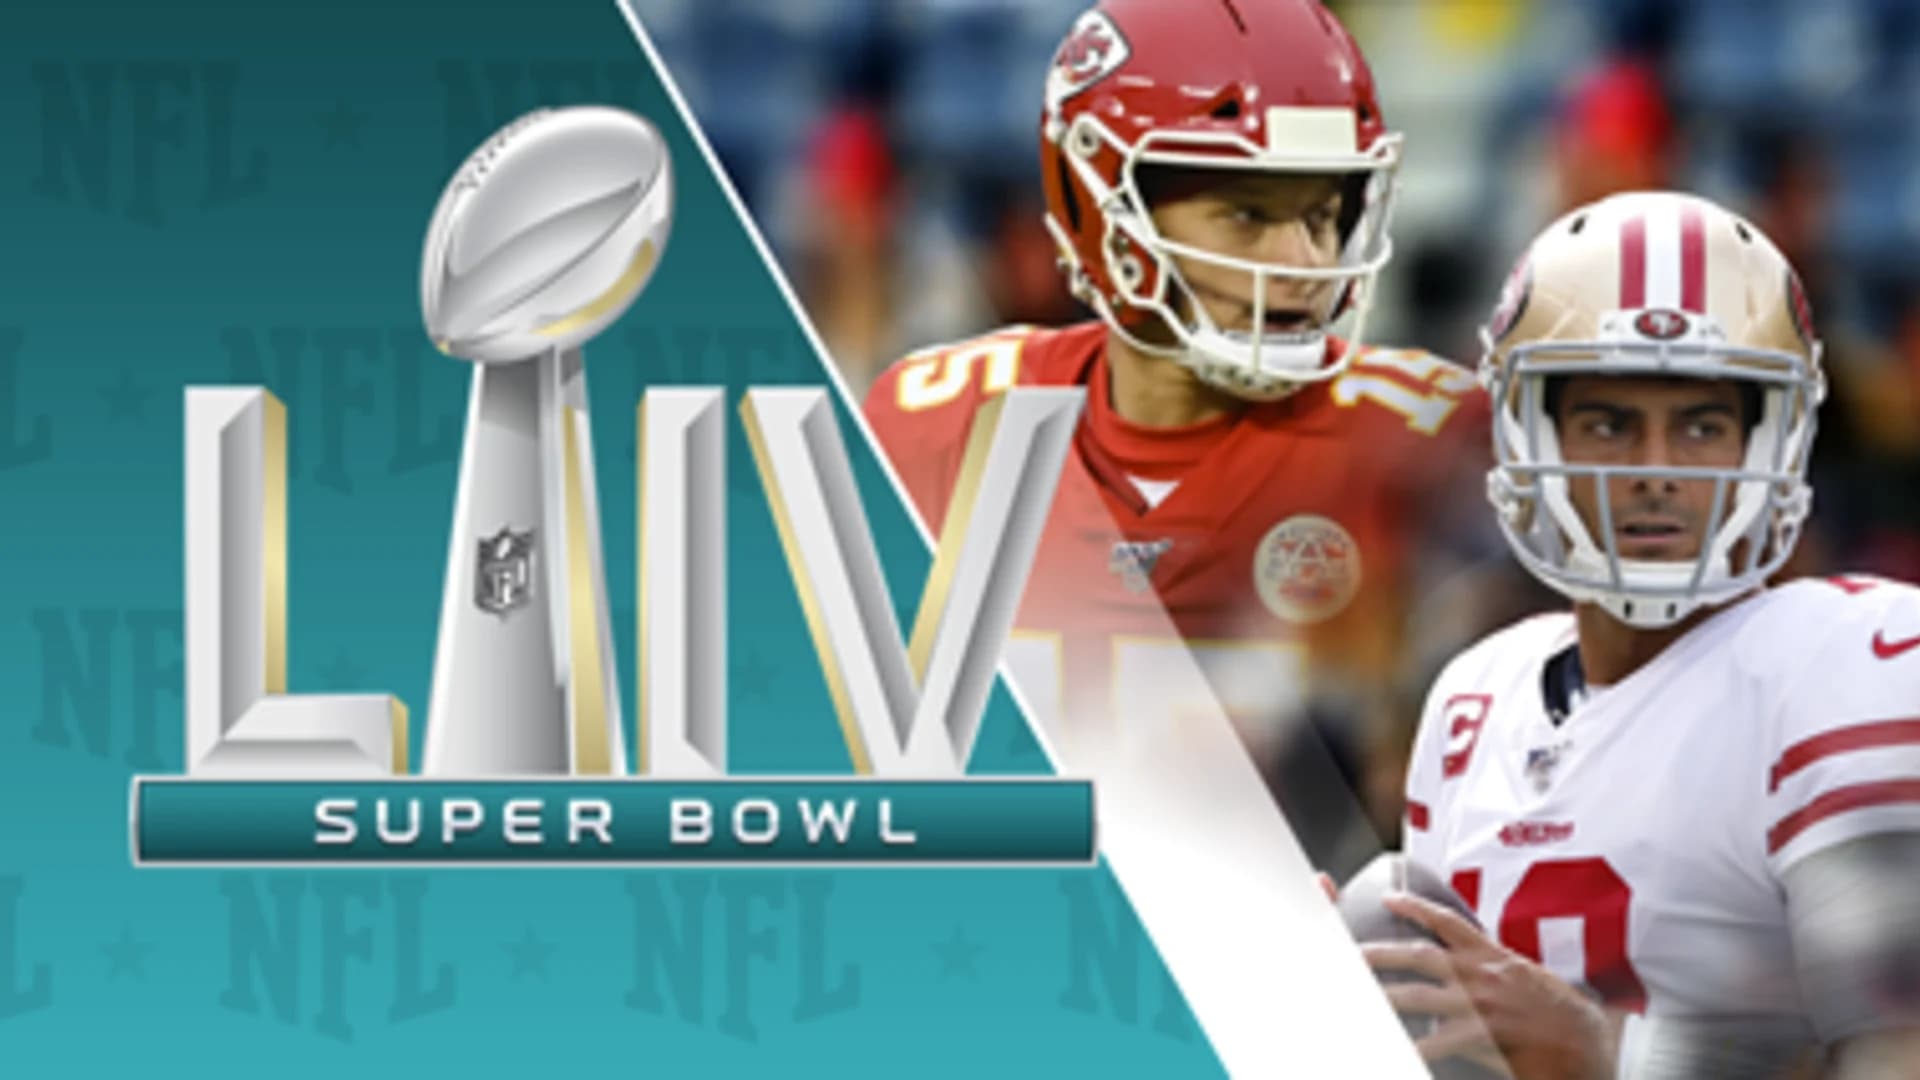 Who will win the Super Bowl? You tell us!